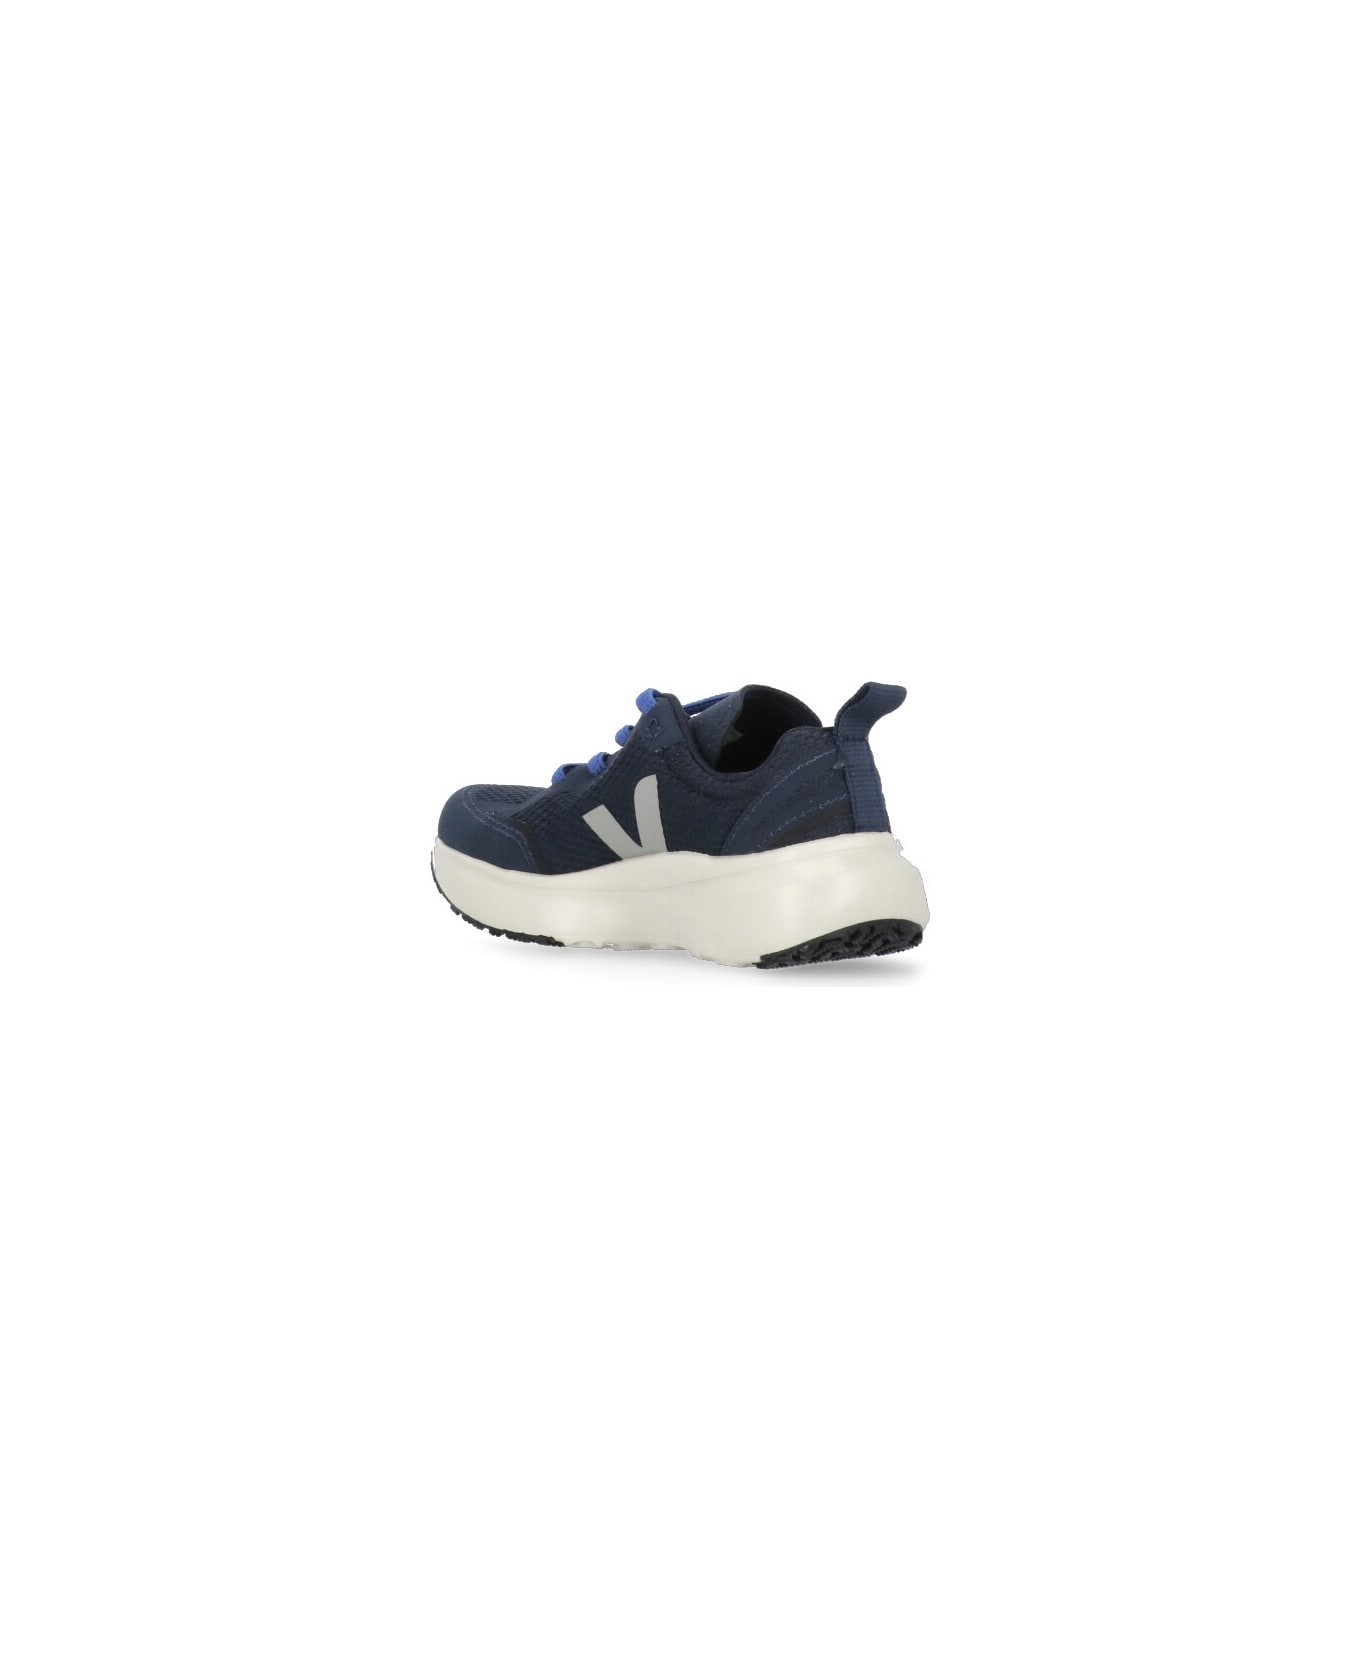 Veja Canary Sneakers - Blue シューズ